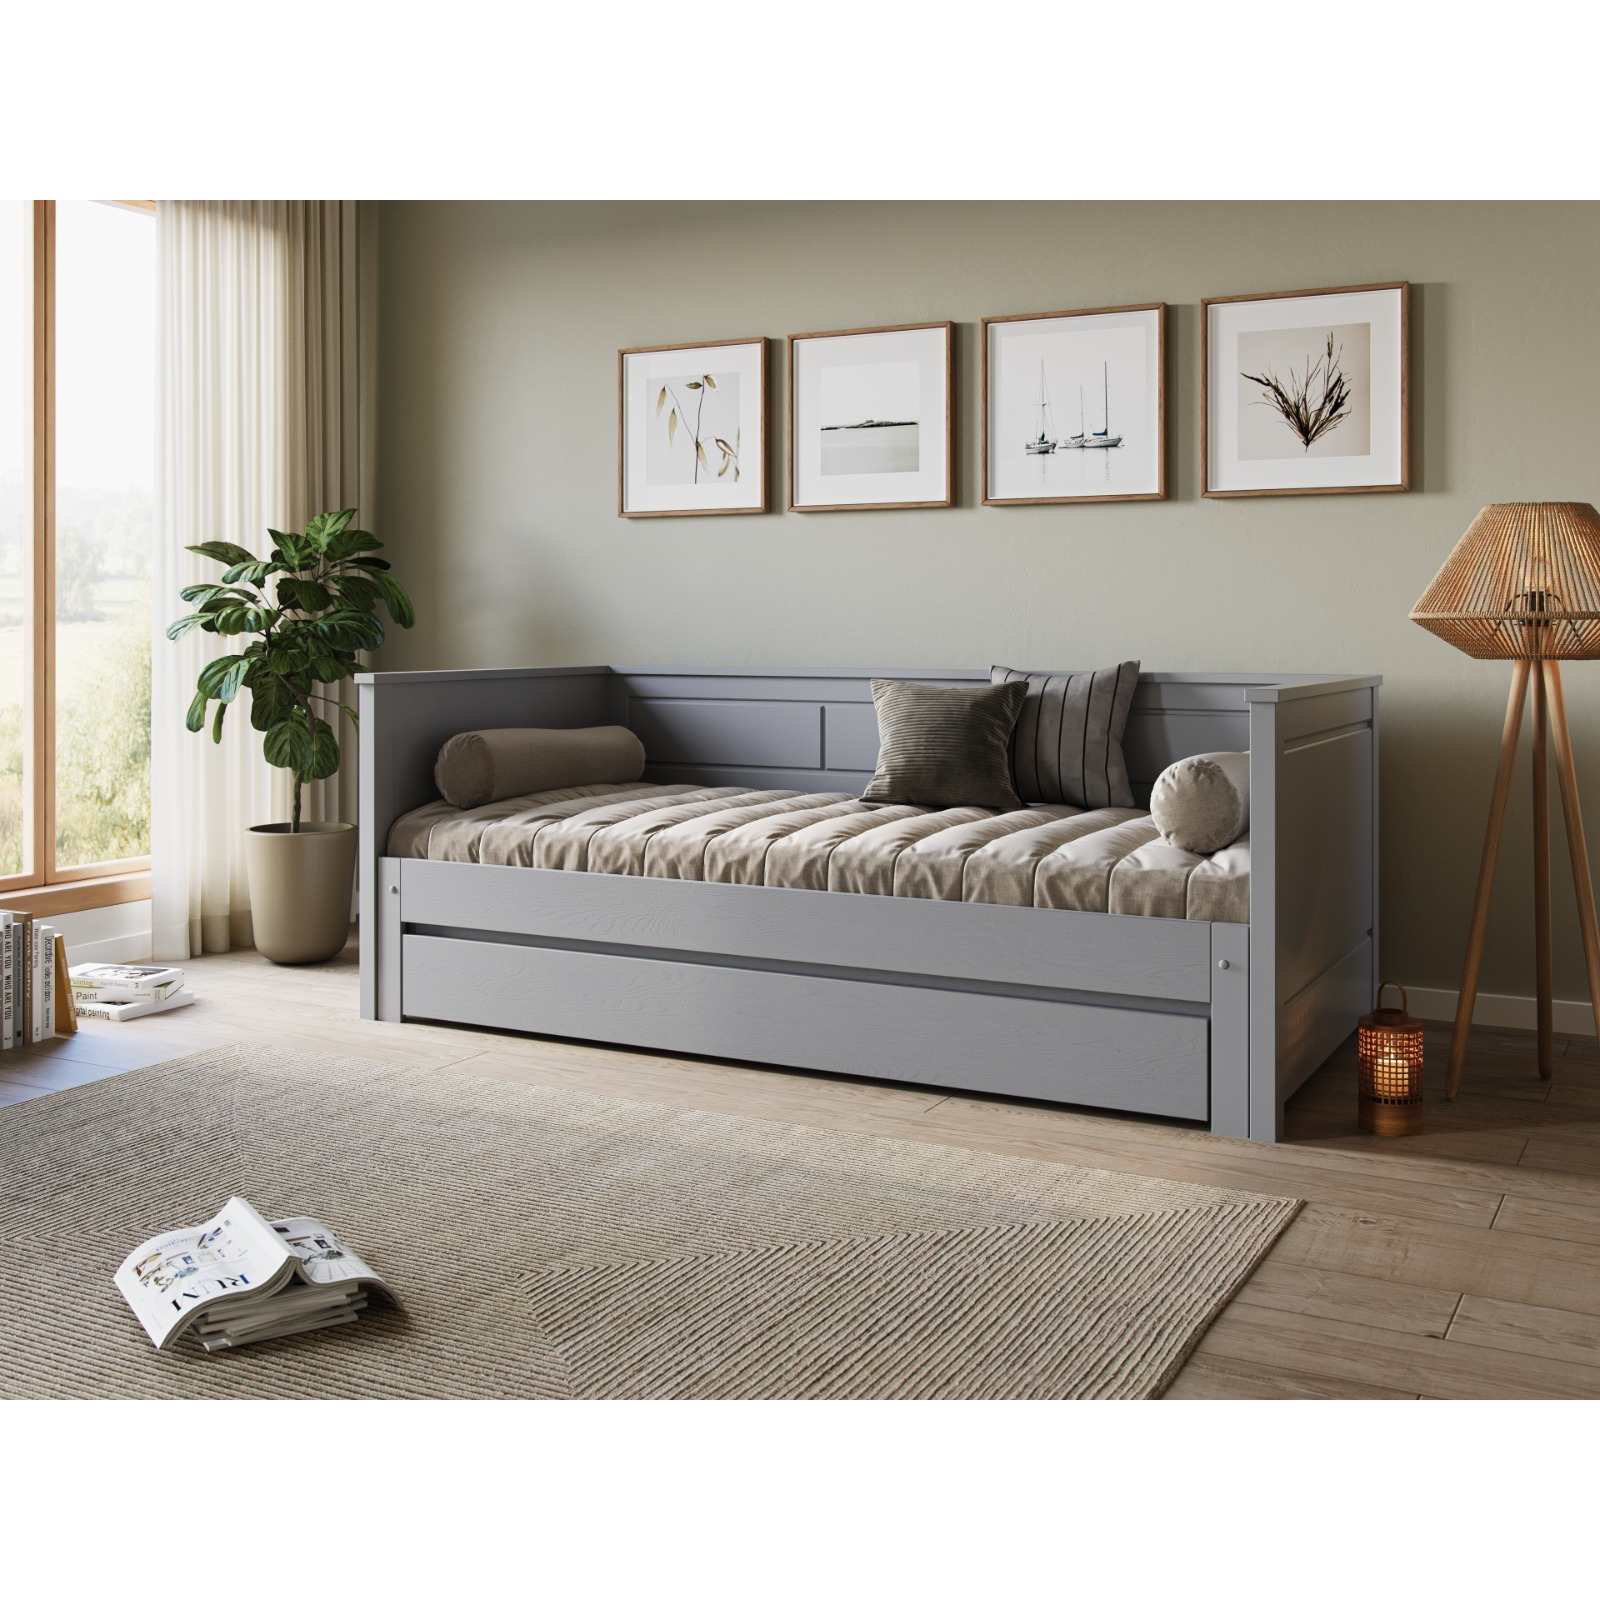 Noomi Erika Solid Wood Guest Bed (FSC-Certified) Grey - image 1